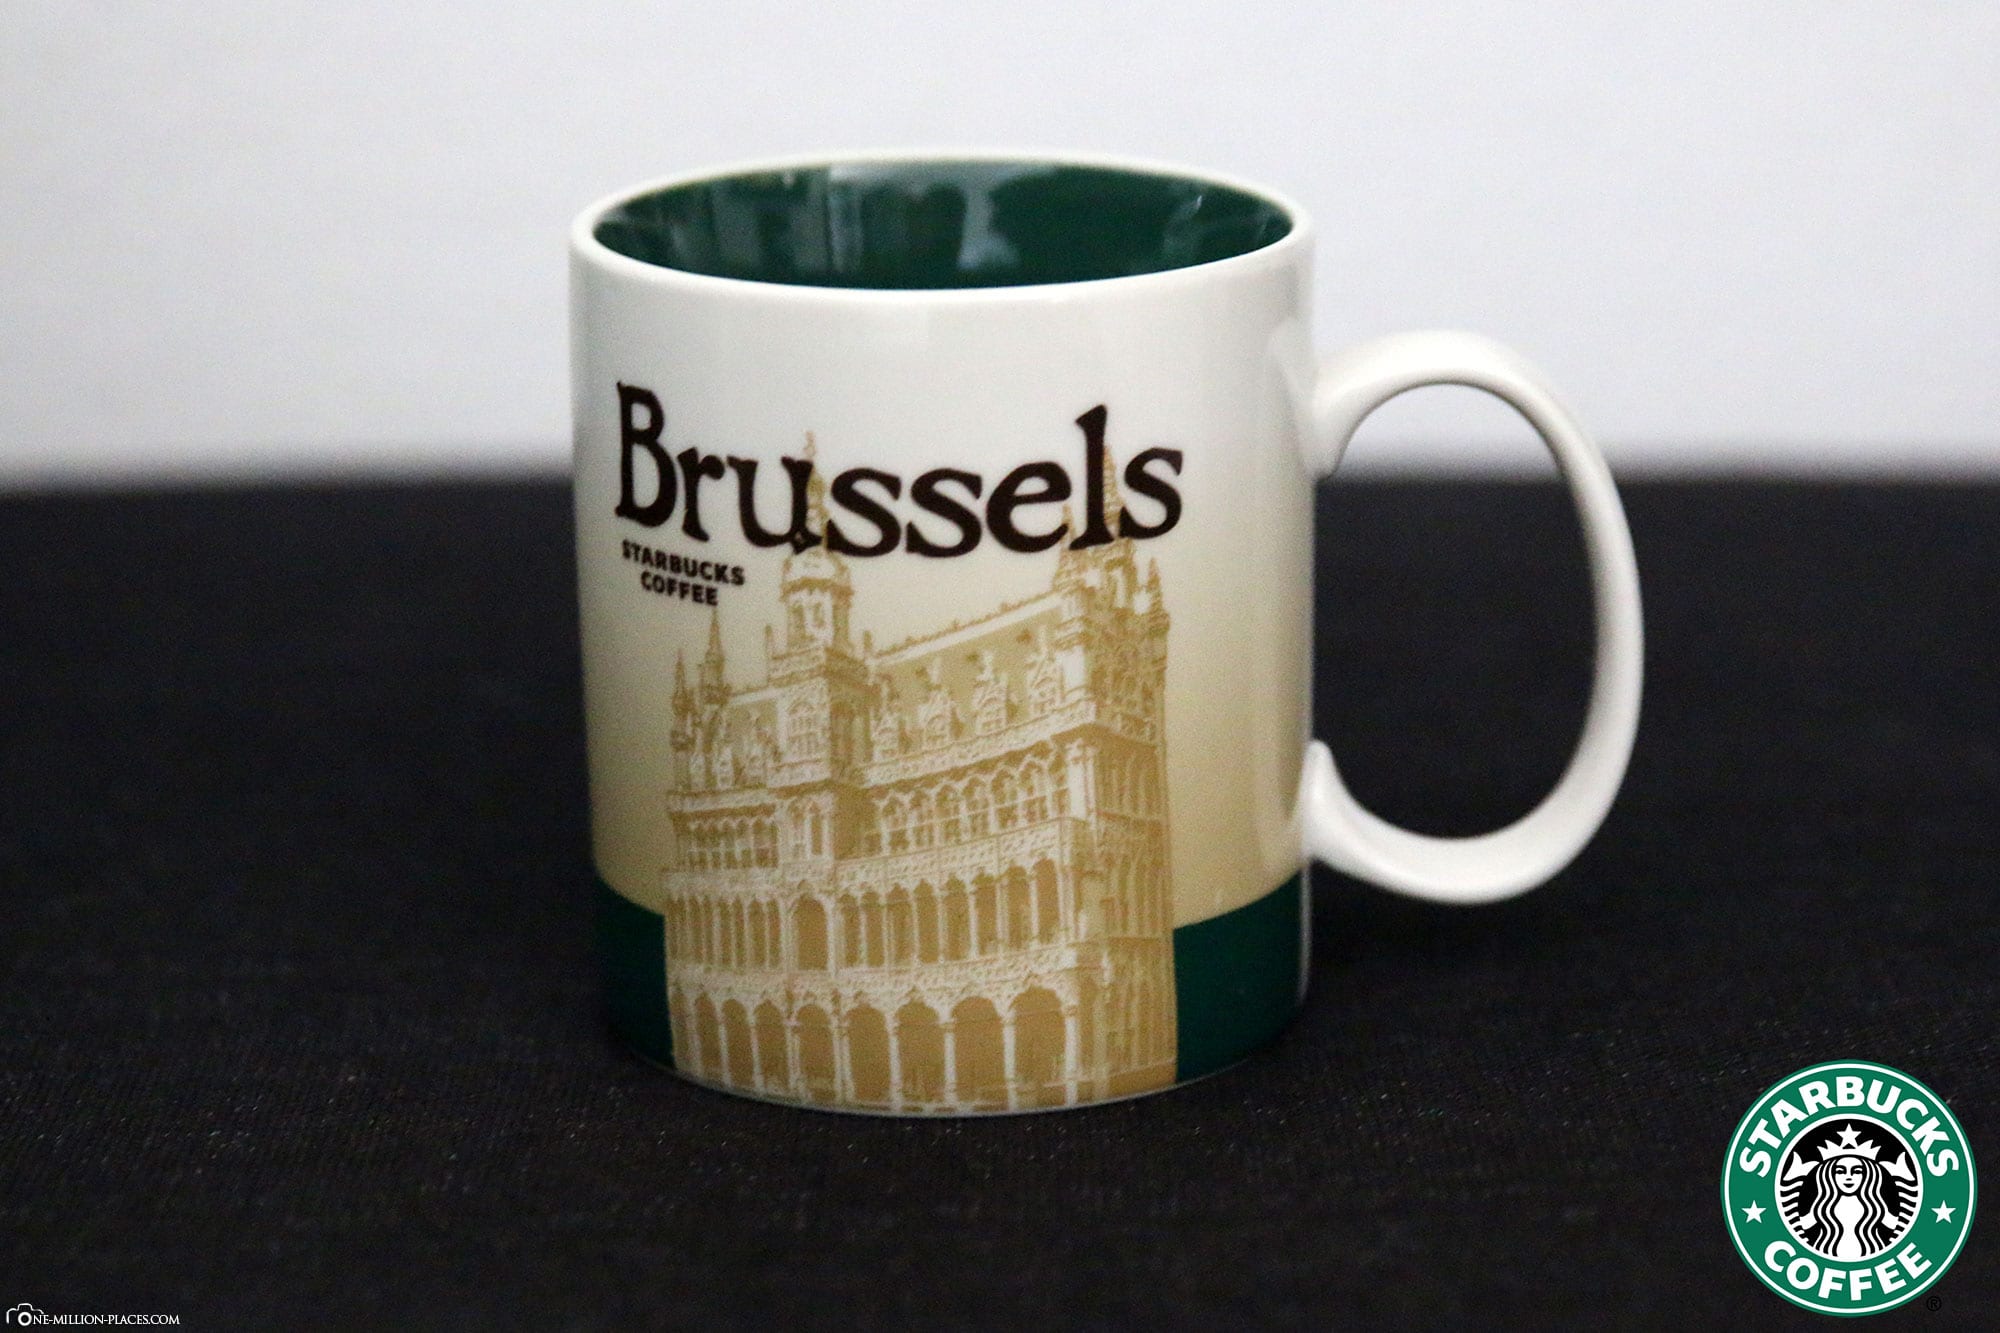 Brussels, Starbucks Cup, Global Icon Series, City Mugs, Collection, Belgium, Travelreport